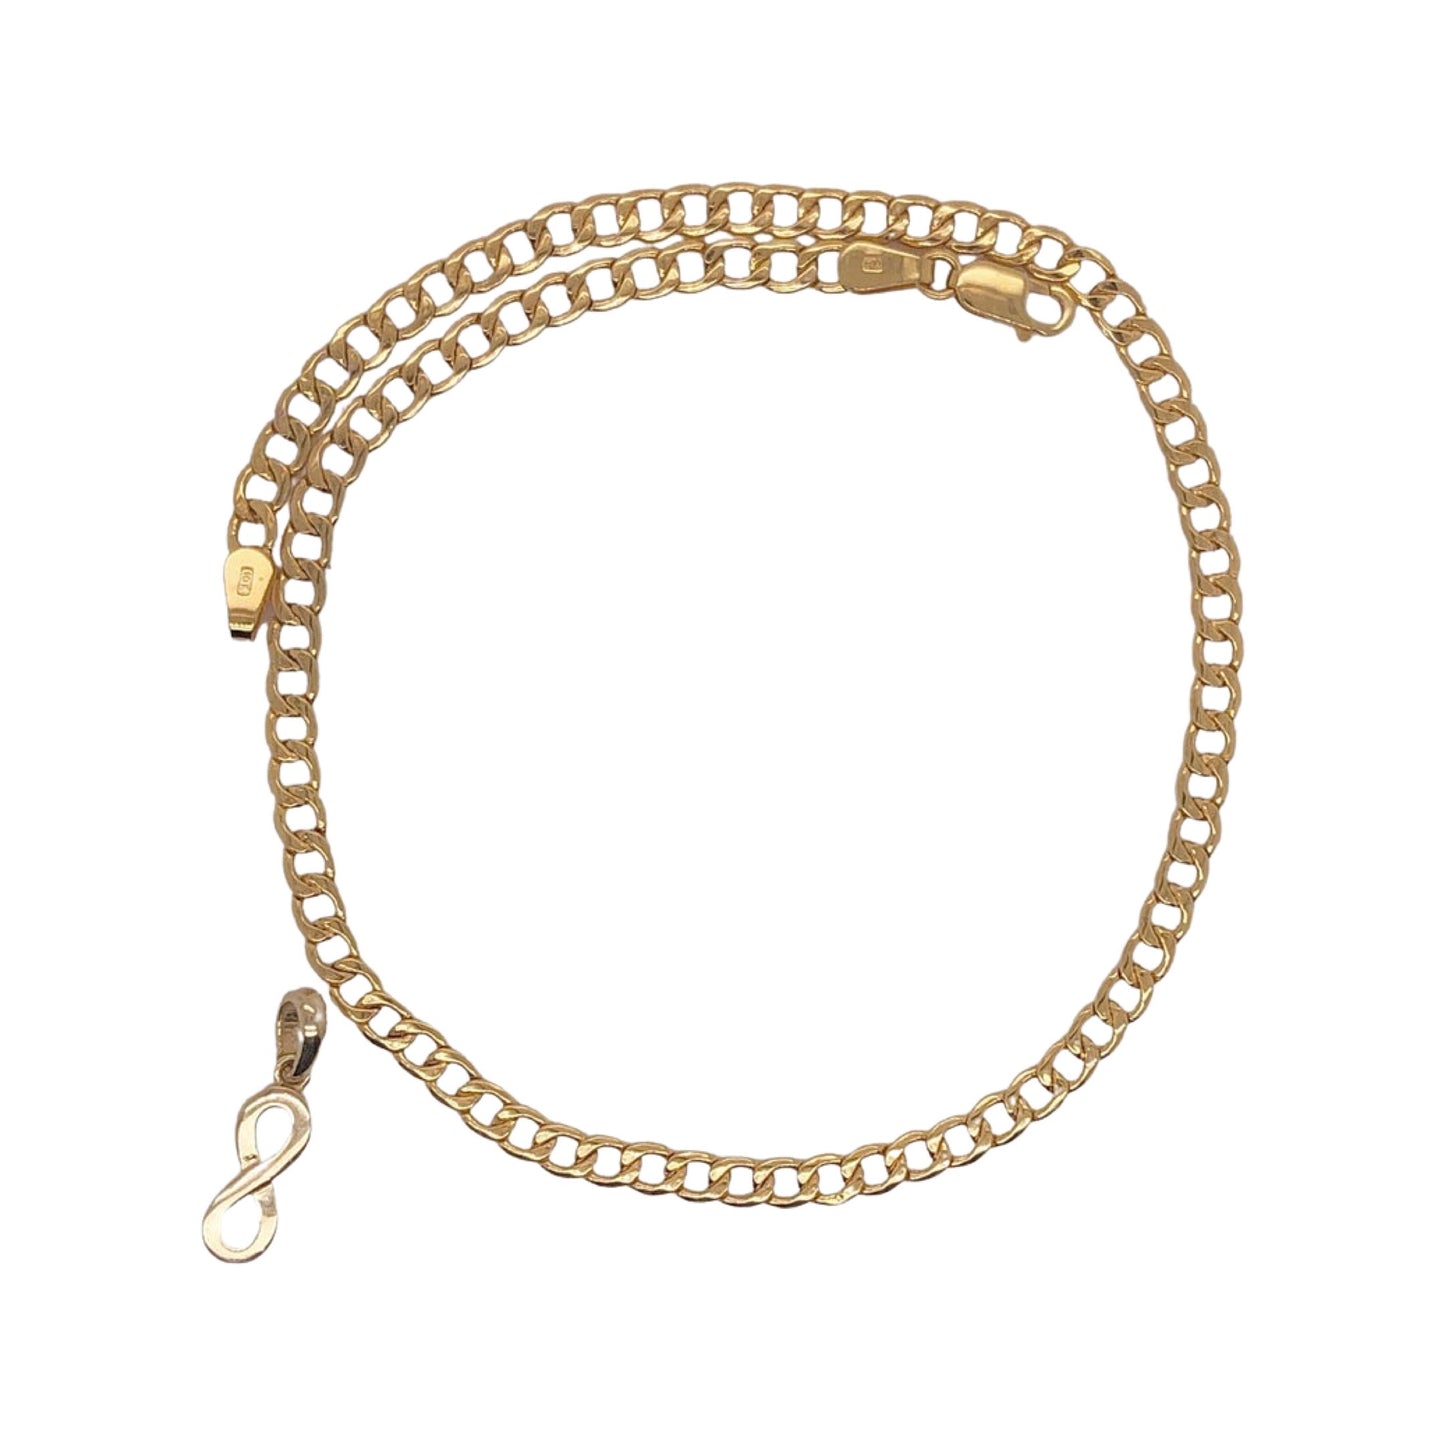 10k yellow gold anklet with infinity charm 